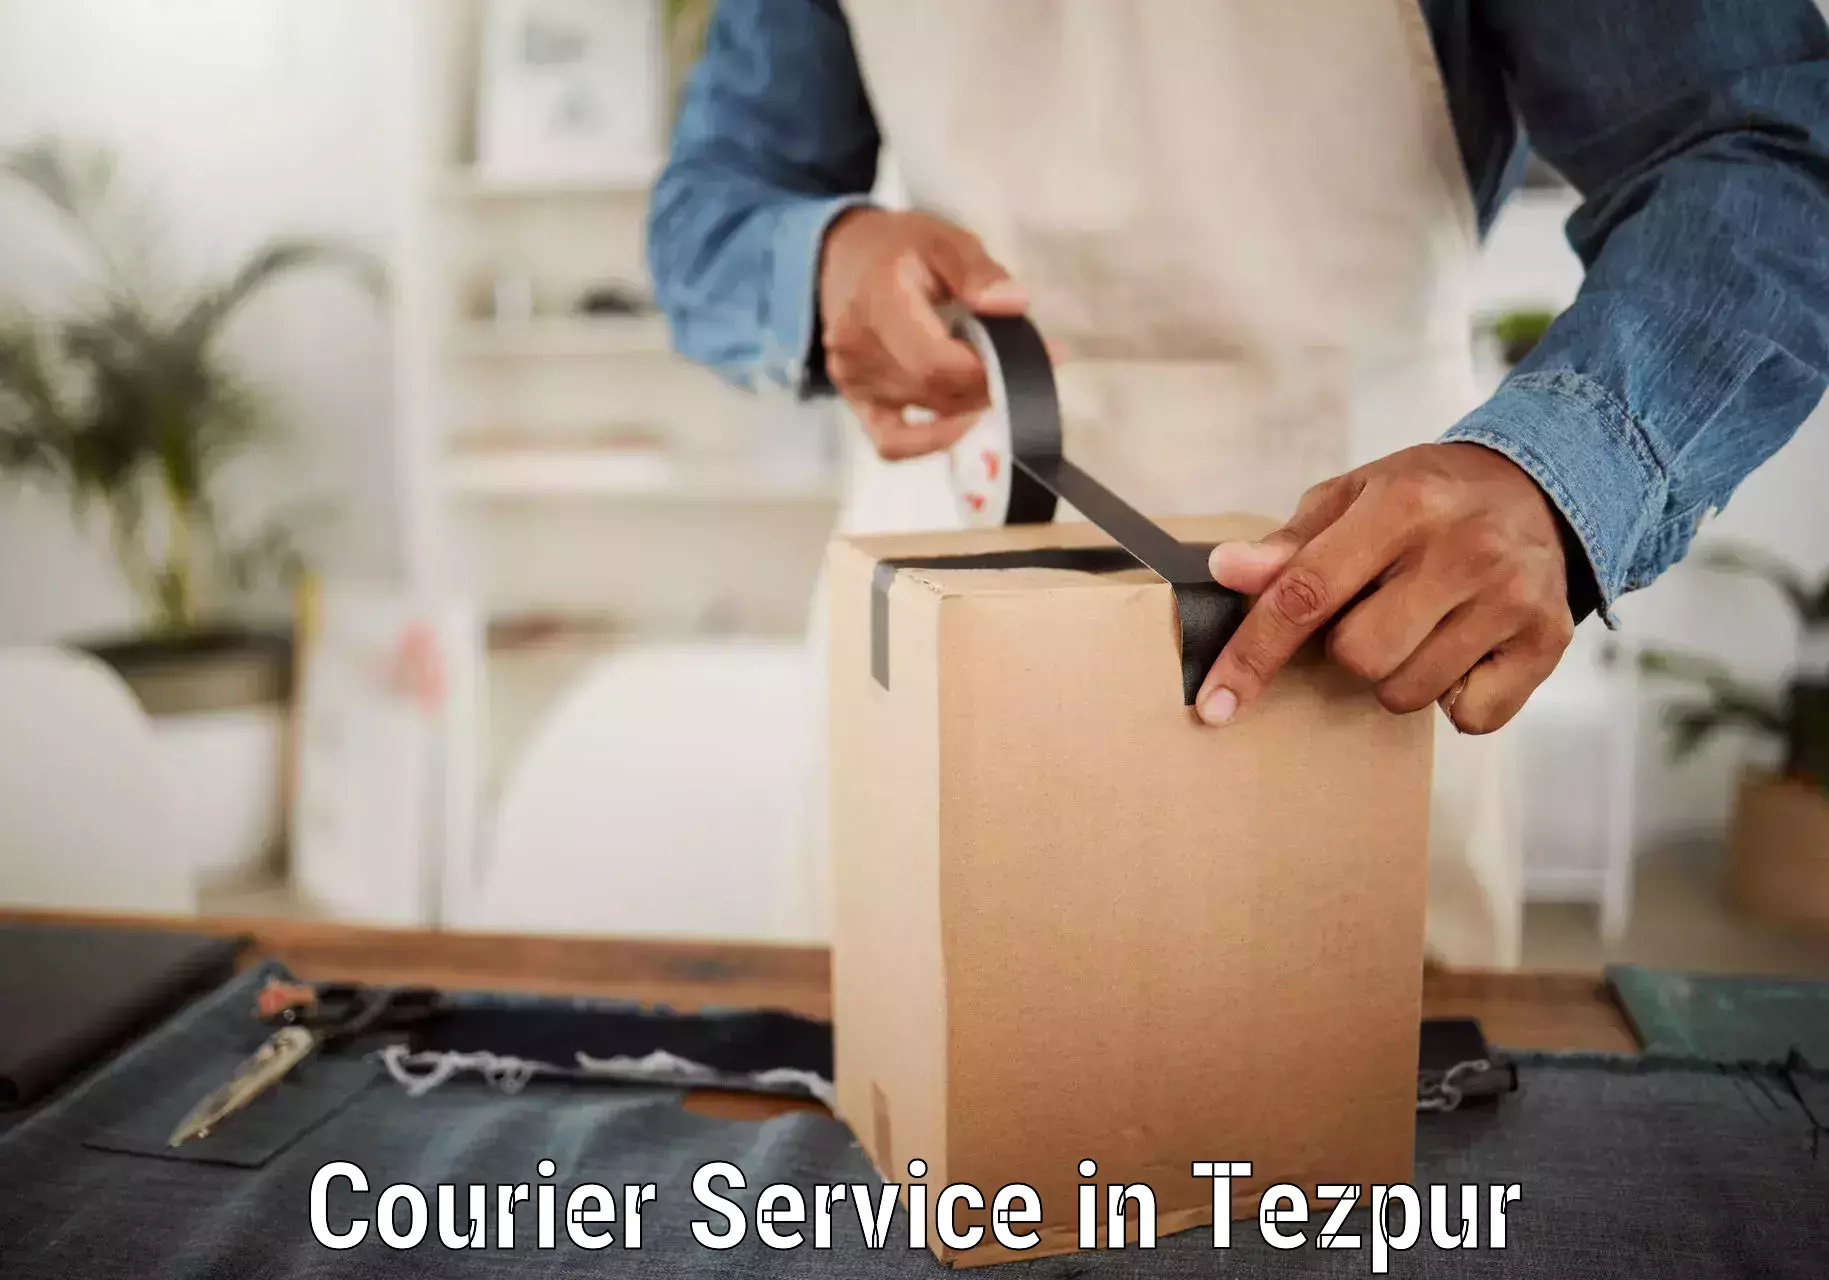 Multi-national courier services in Tezpur